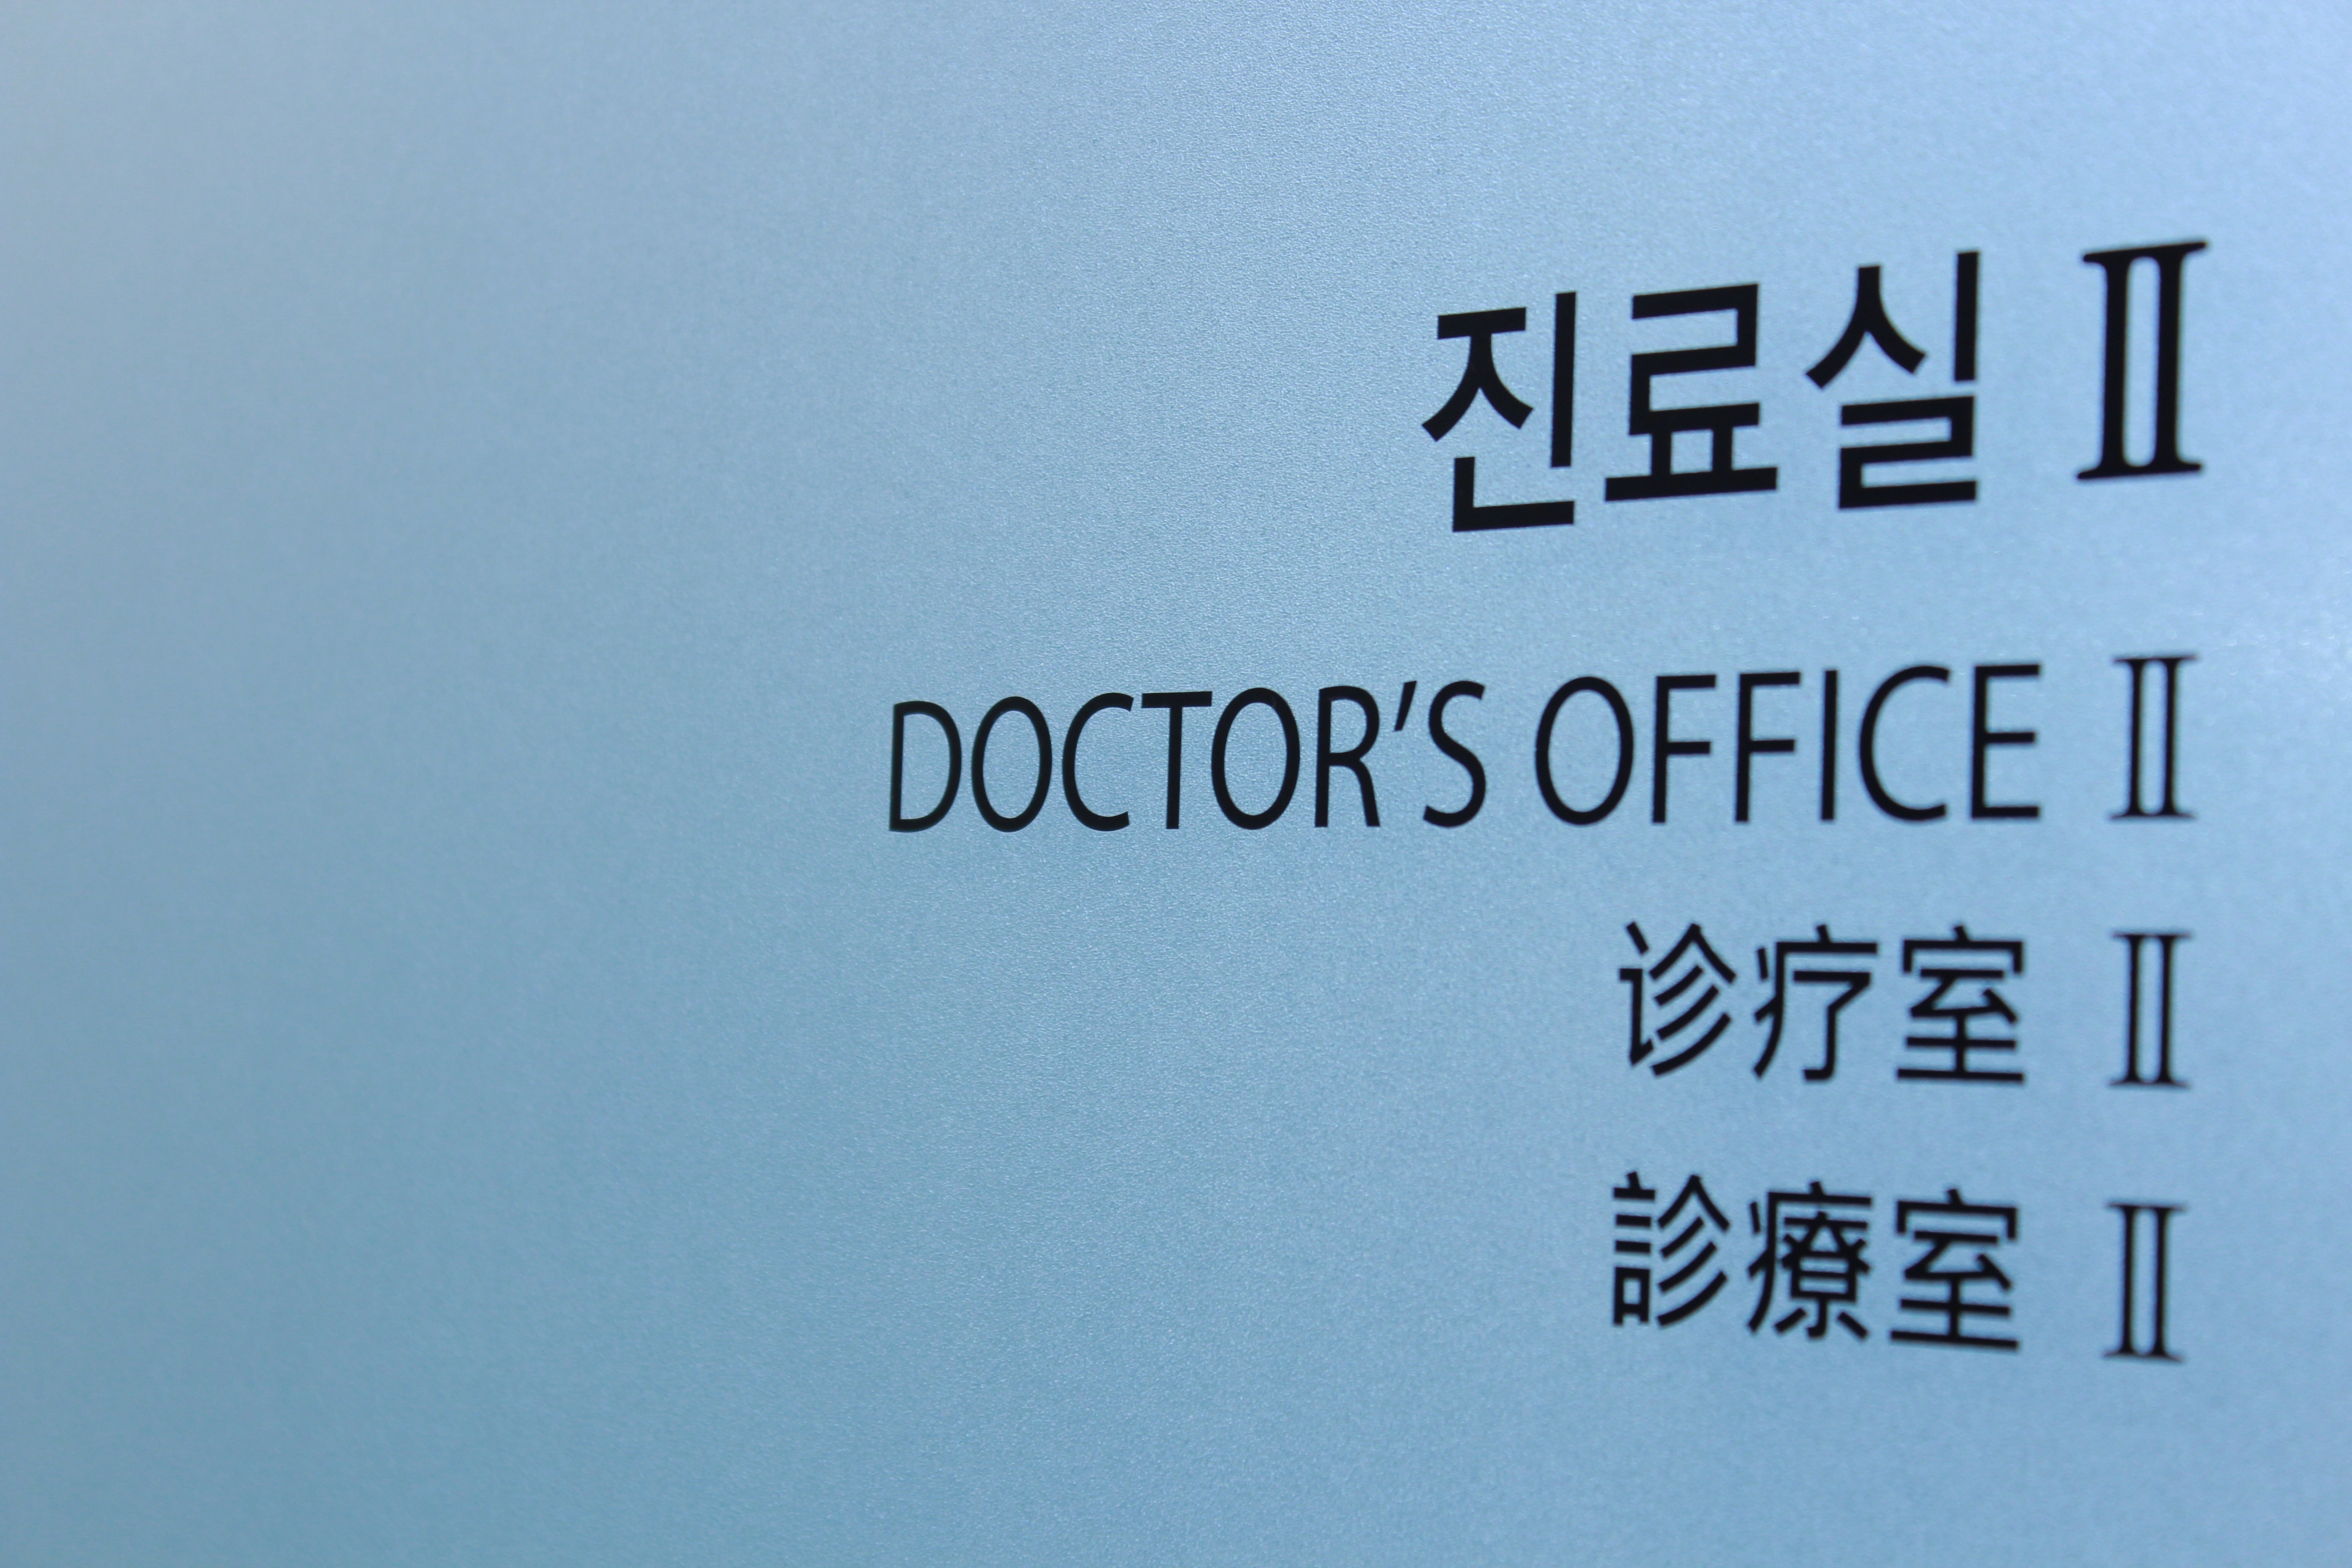 Medical, Moon, Hospital, Office, Sign, text, close-up